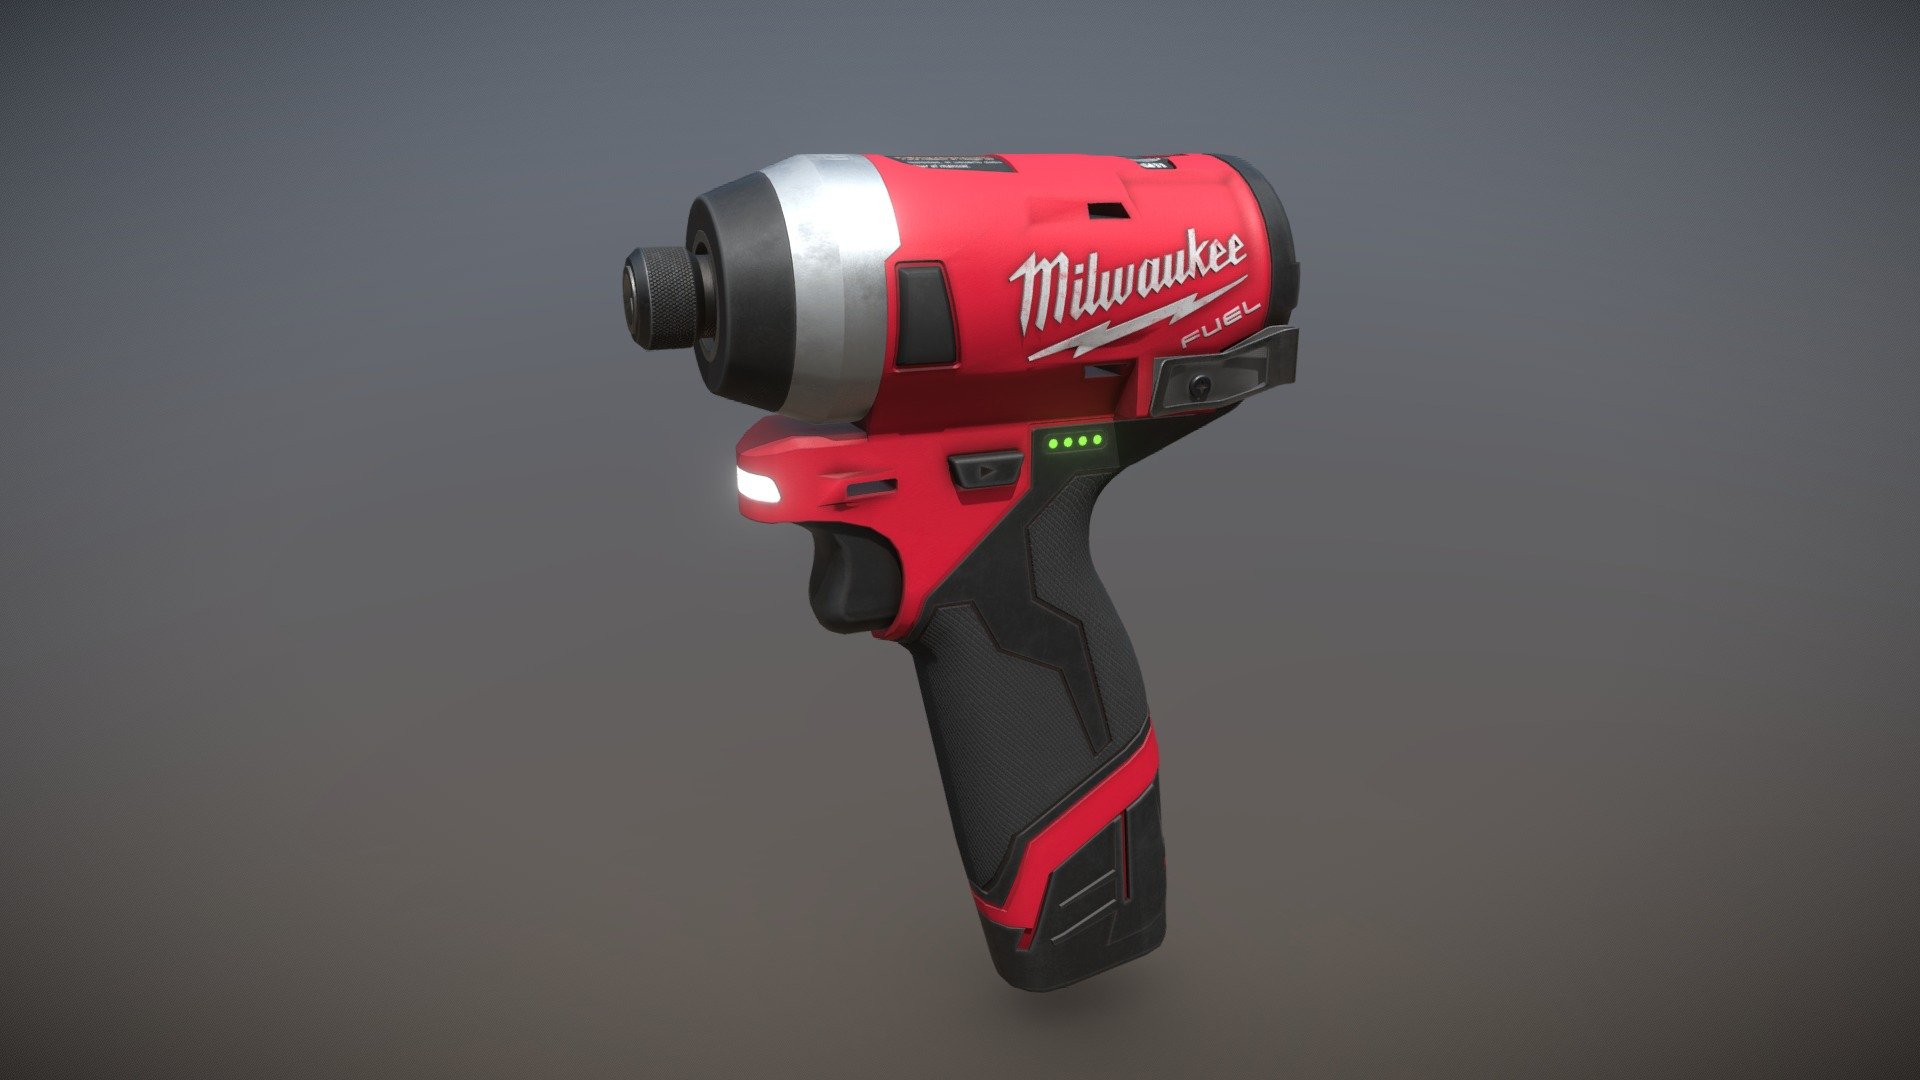 Milwaukee brand impact driver - typically used along with socket drivers for tightening or loosening nuts 3d model